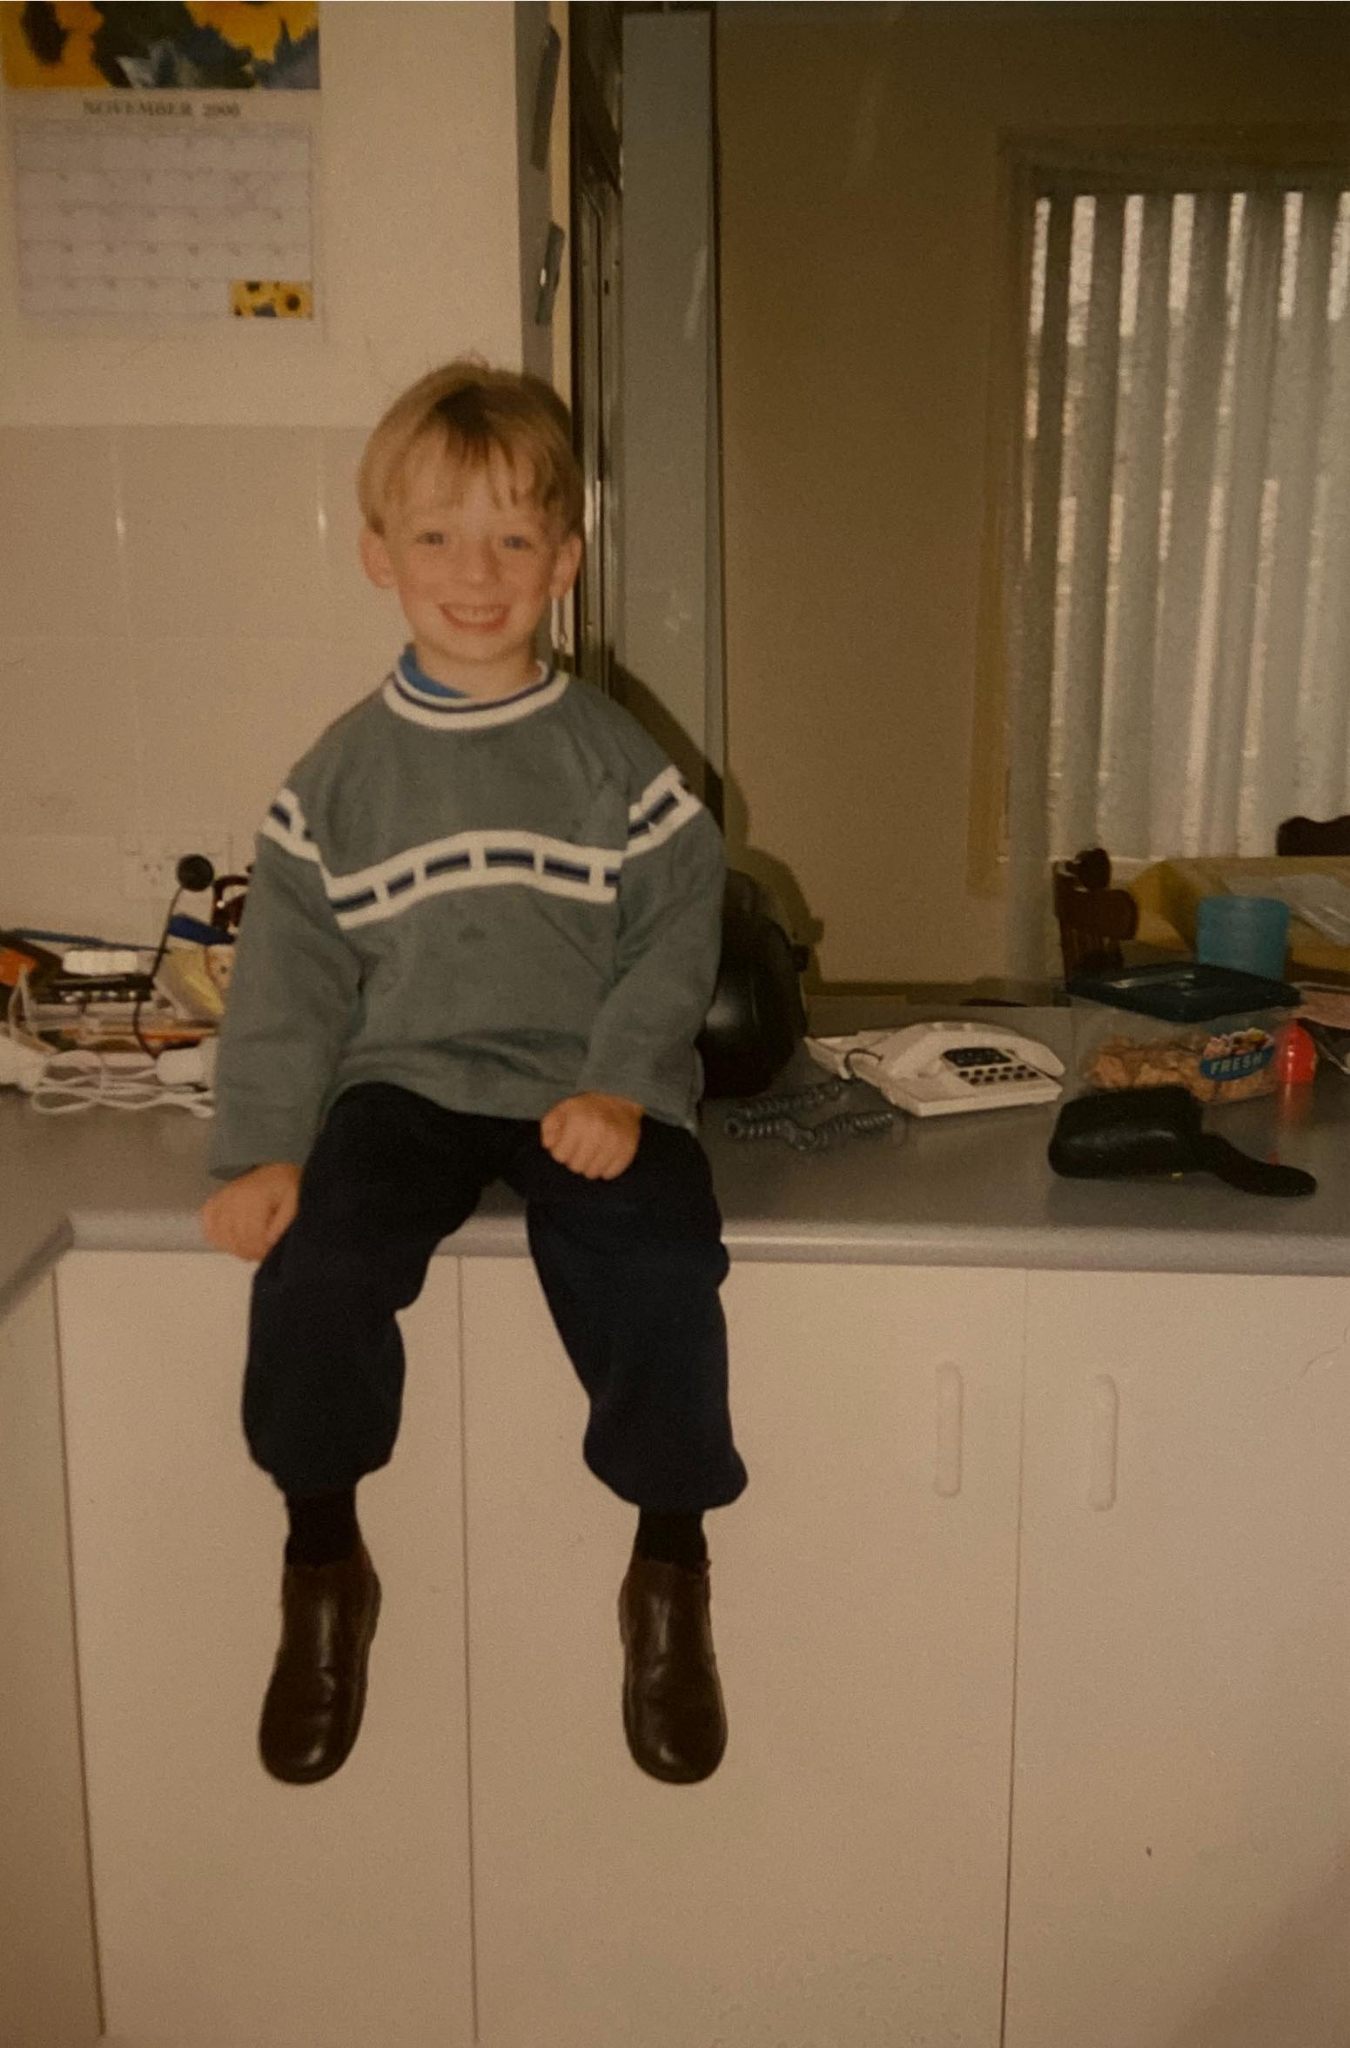 Boy with blond hair wearing a jumper sits on a kitchen bench